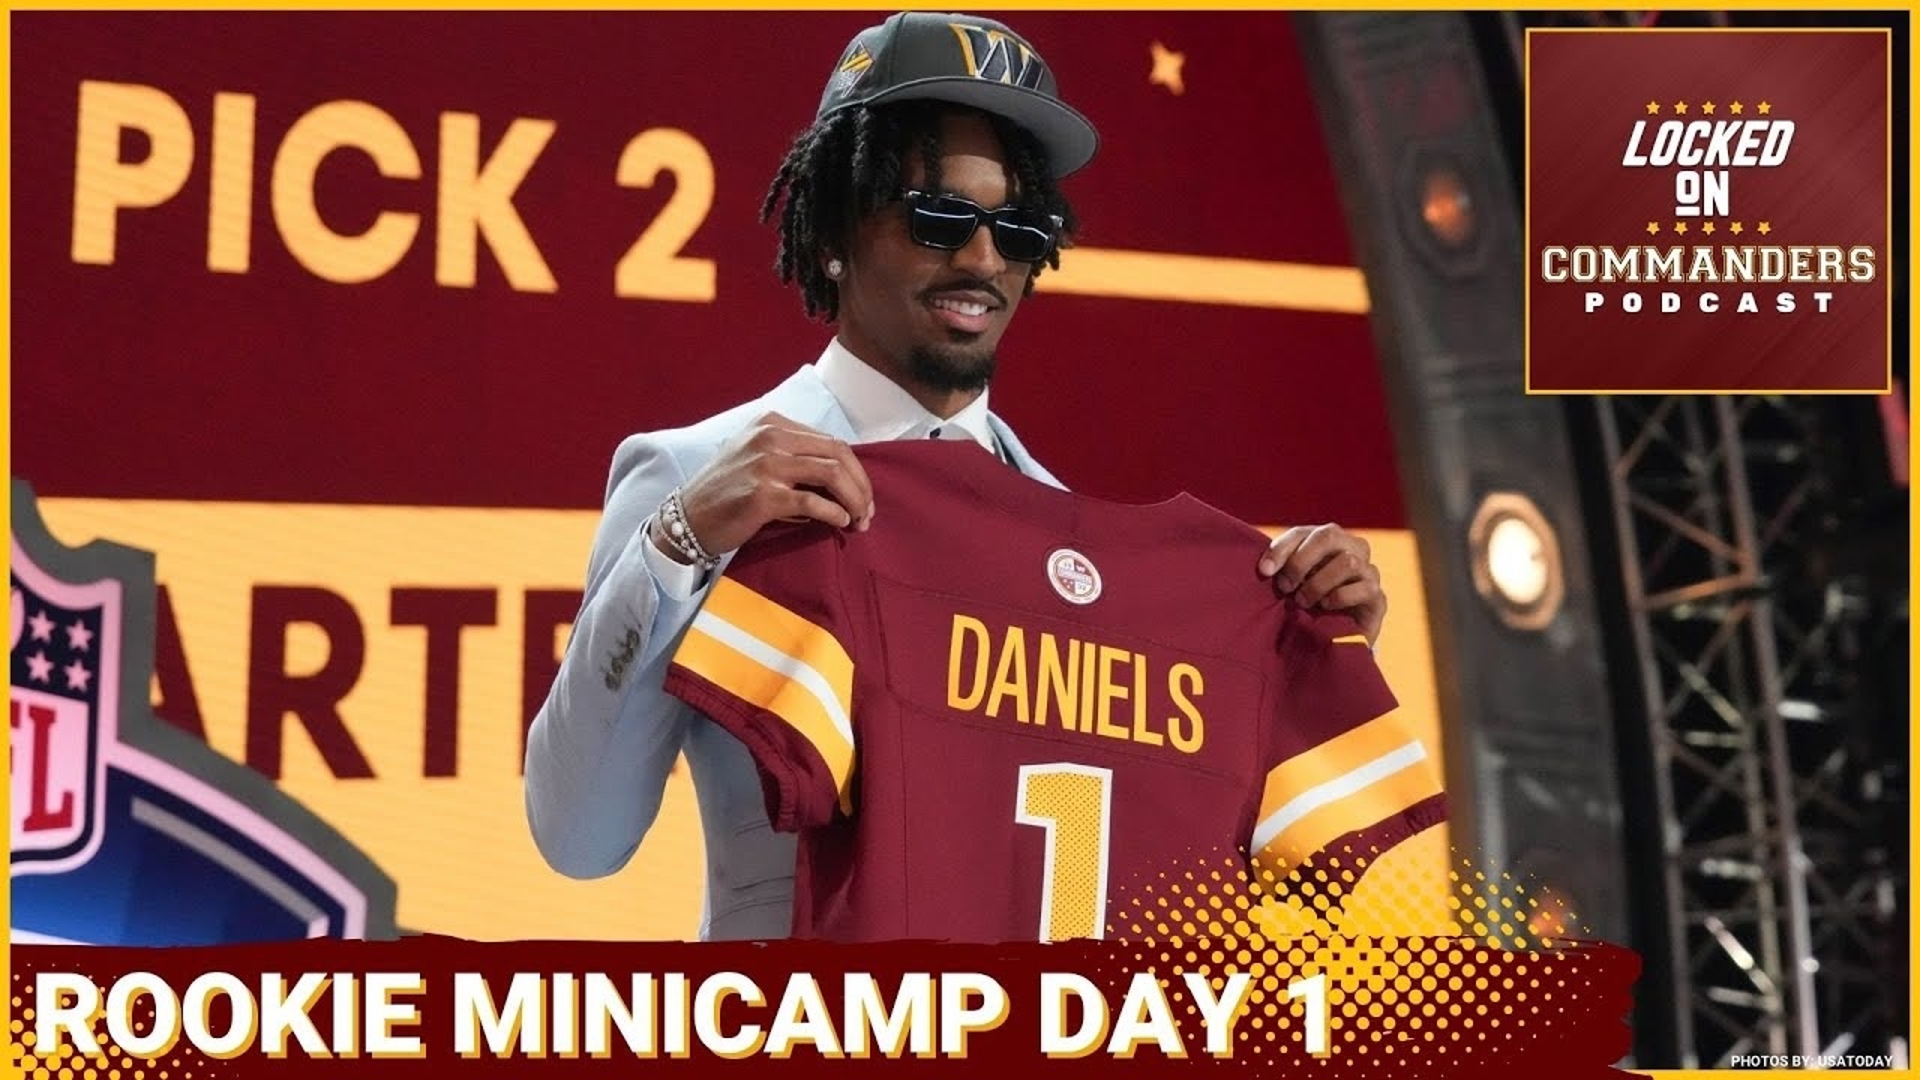 On Thursday Jayden Daniels got his jersey number from Tress Way, and on Friday he made his Washington Commanders debut at Rookie Minicamp.